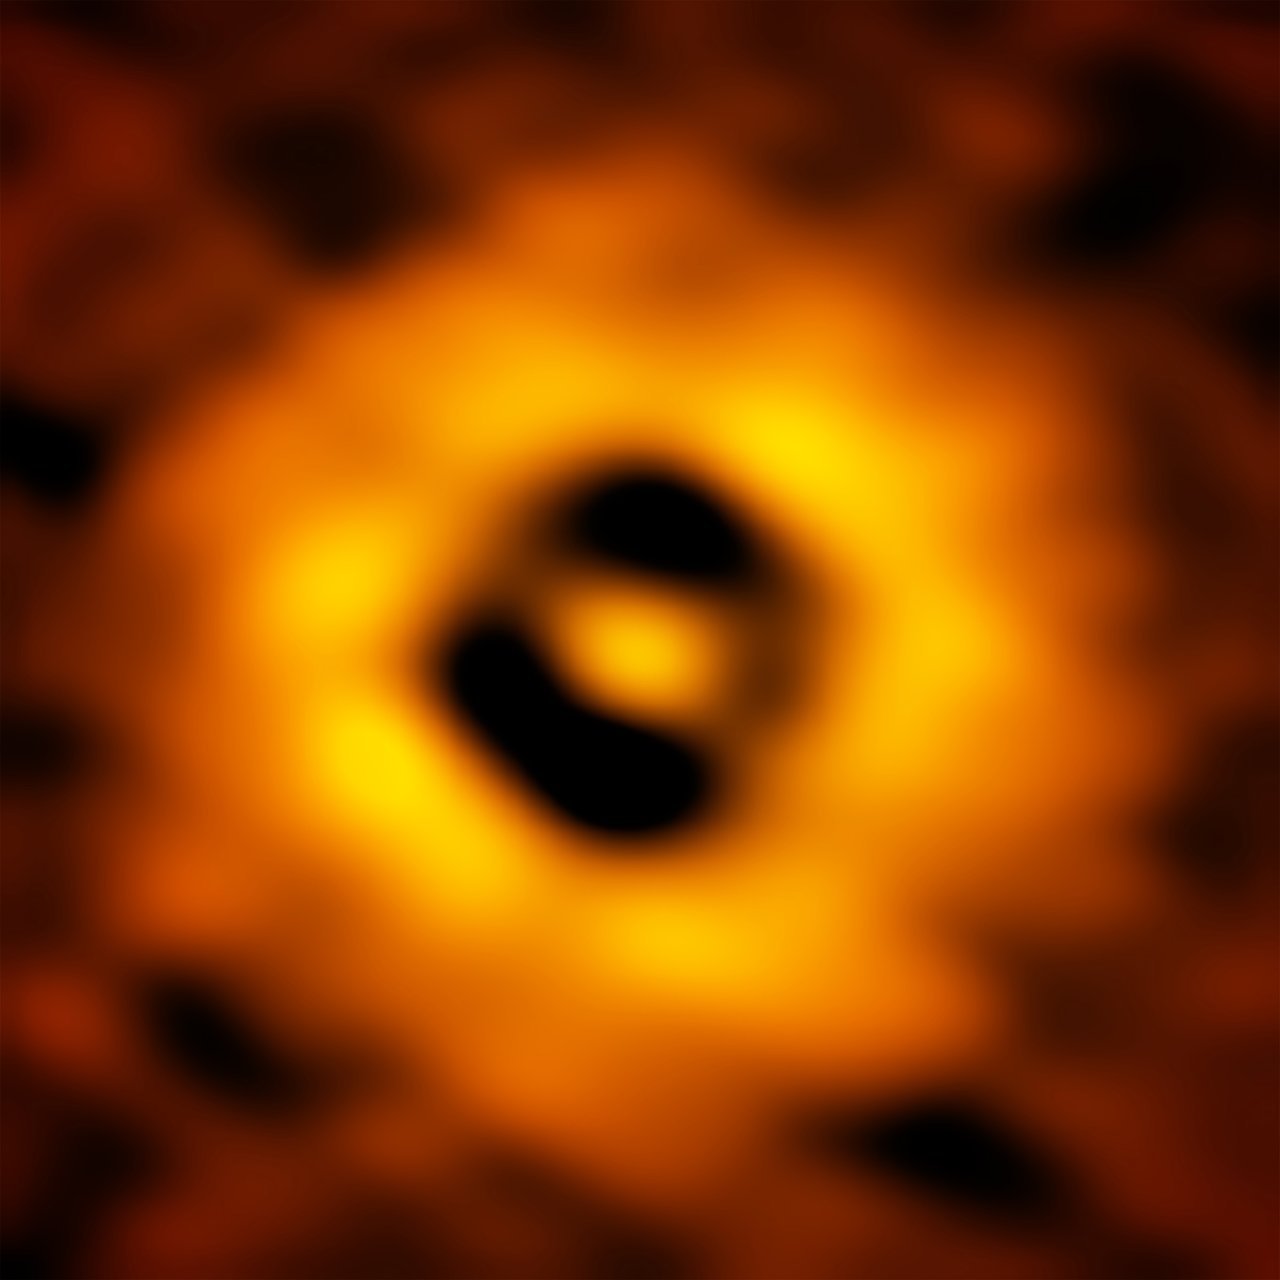 Inner region of the TW Hydrae protoplanetary disc as imaged by A